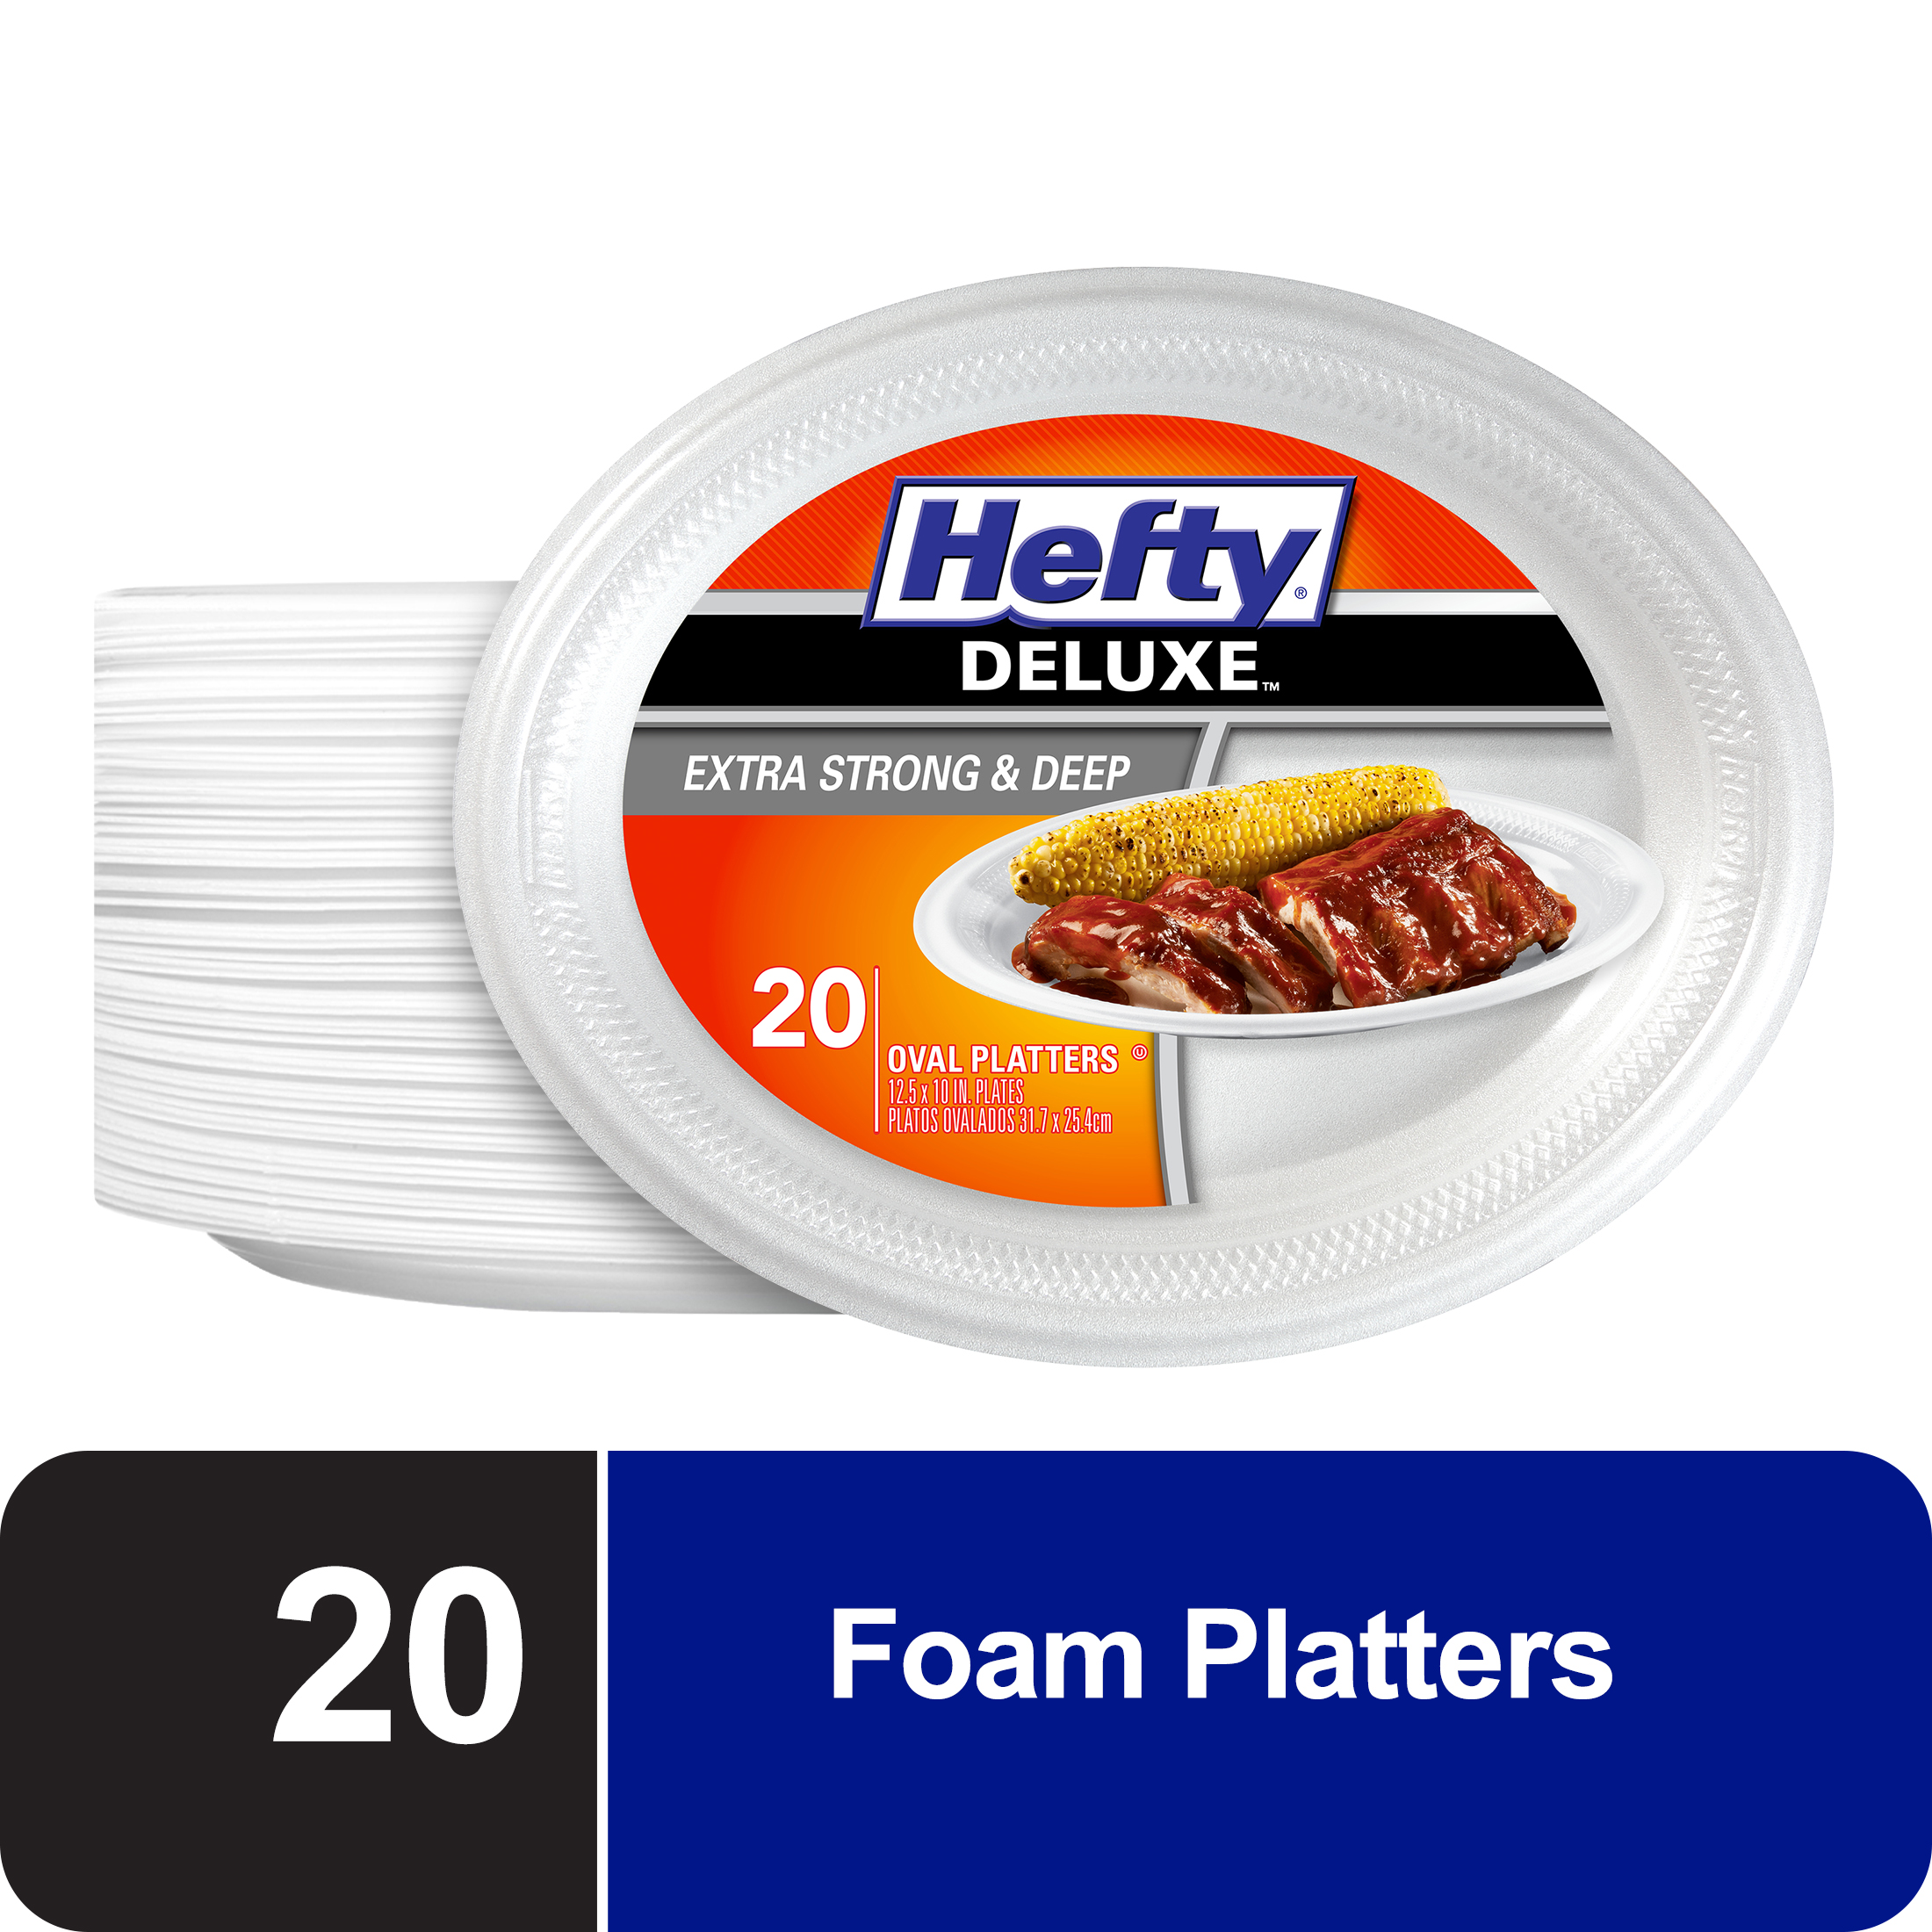 Hefty Deluxe Extra Strong & Deep Foam Platters, Oval, White, 10x12 Inch, 20 Count - image 1 of 5